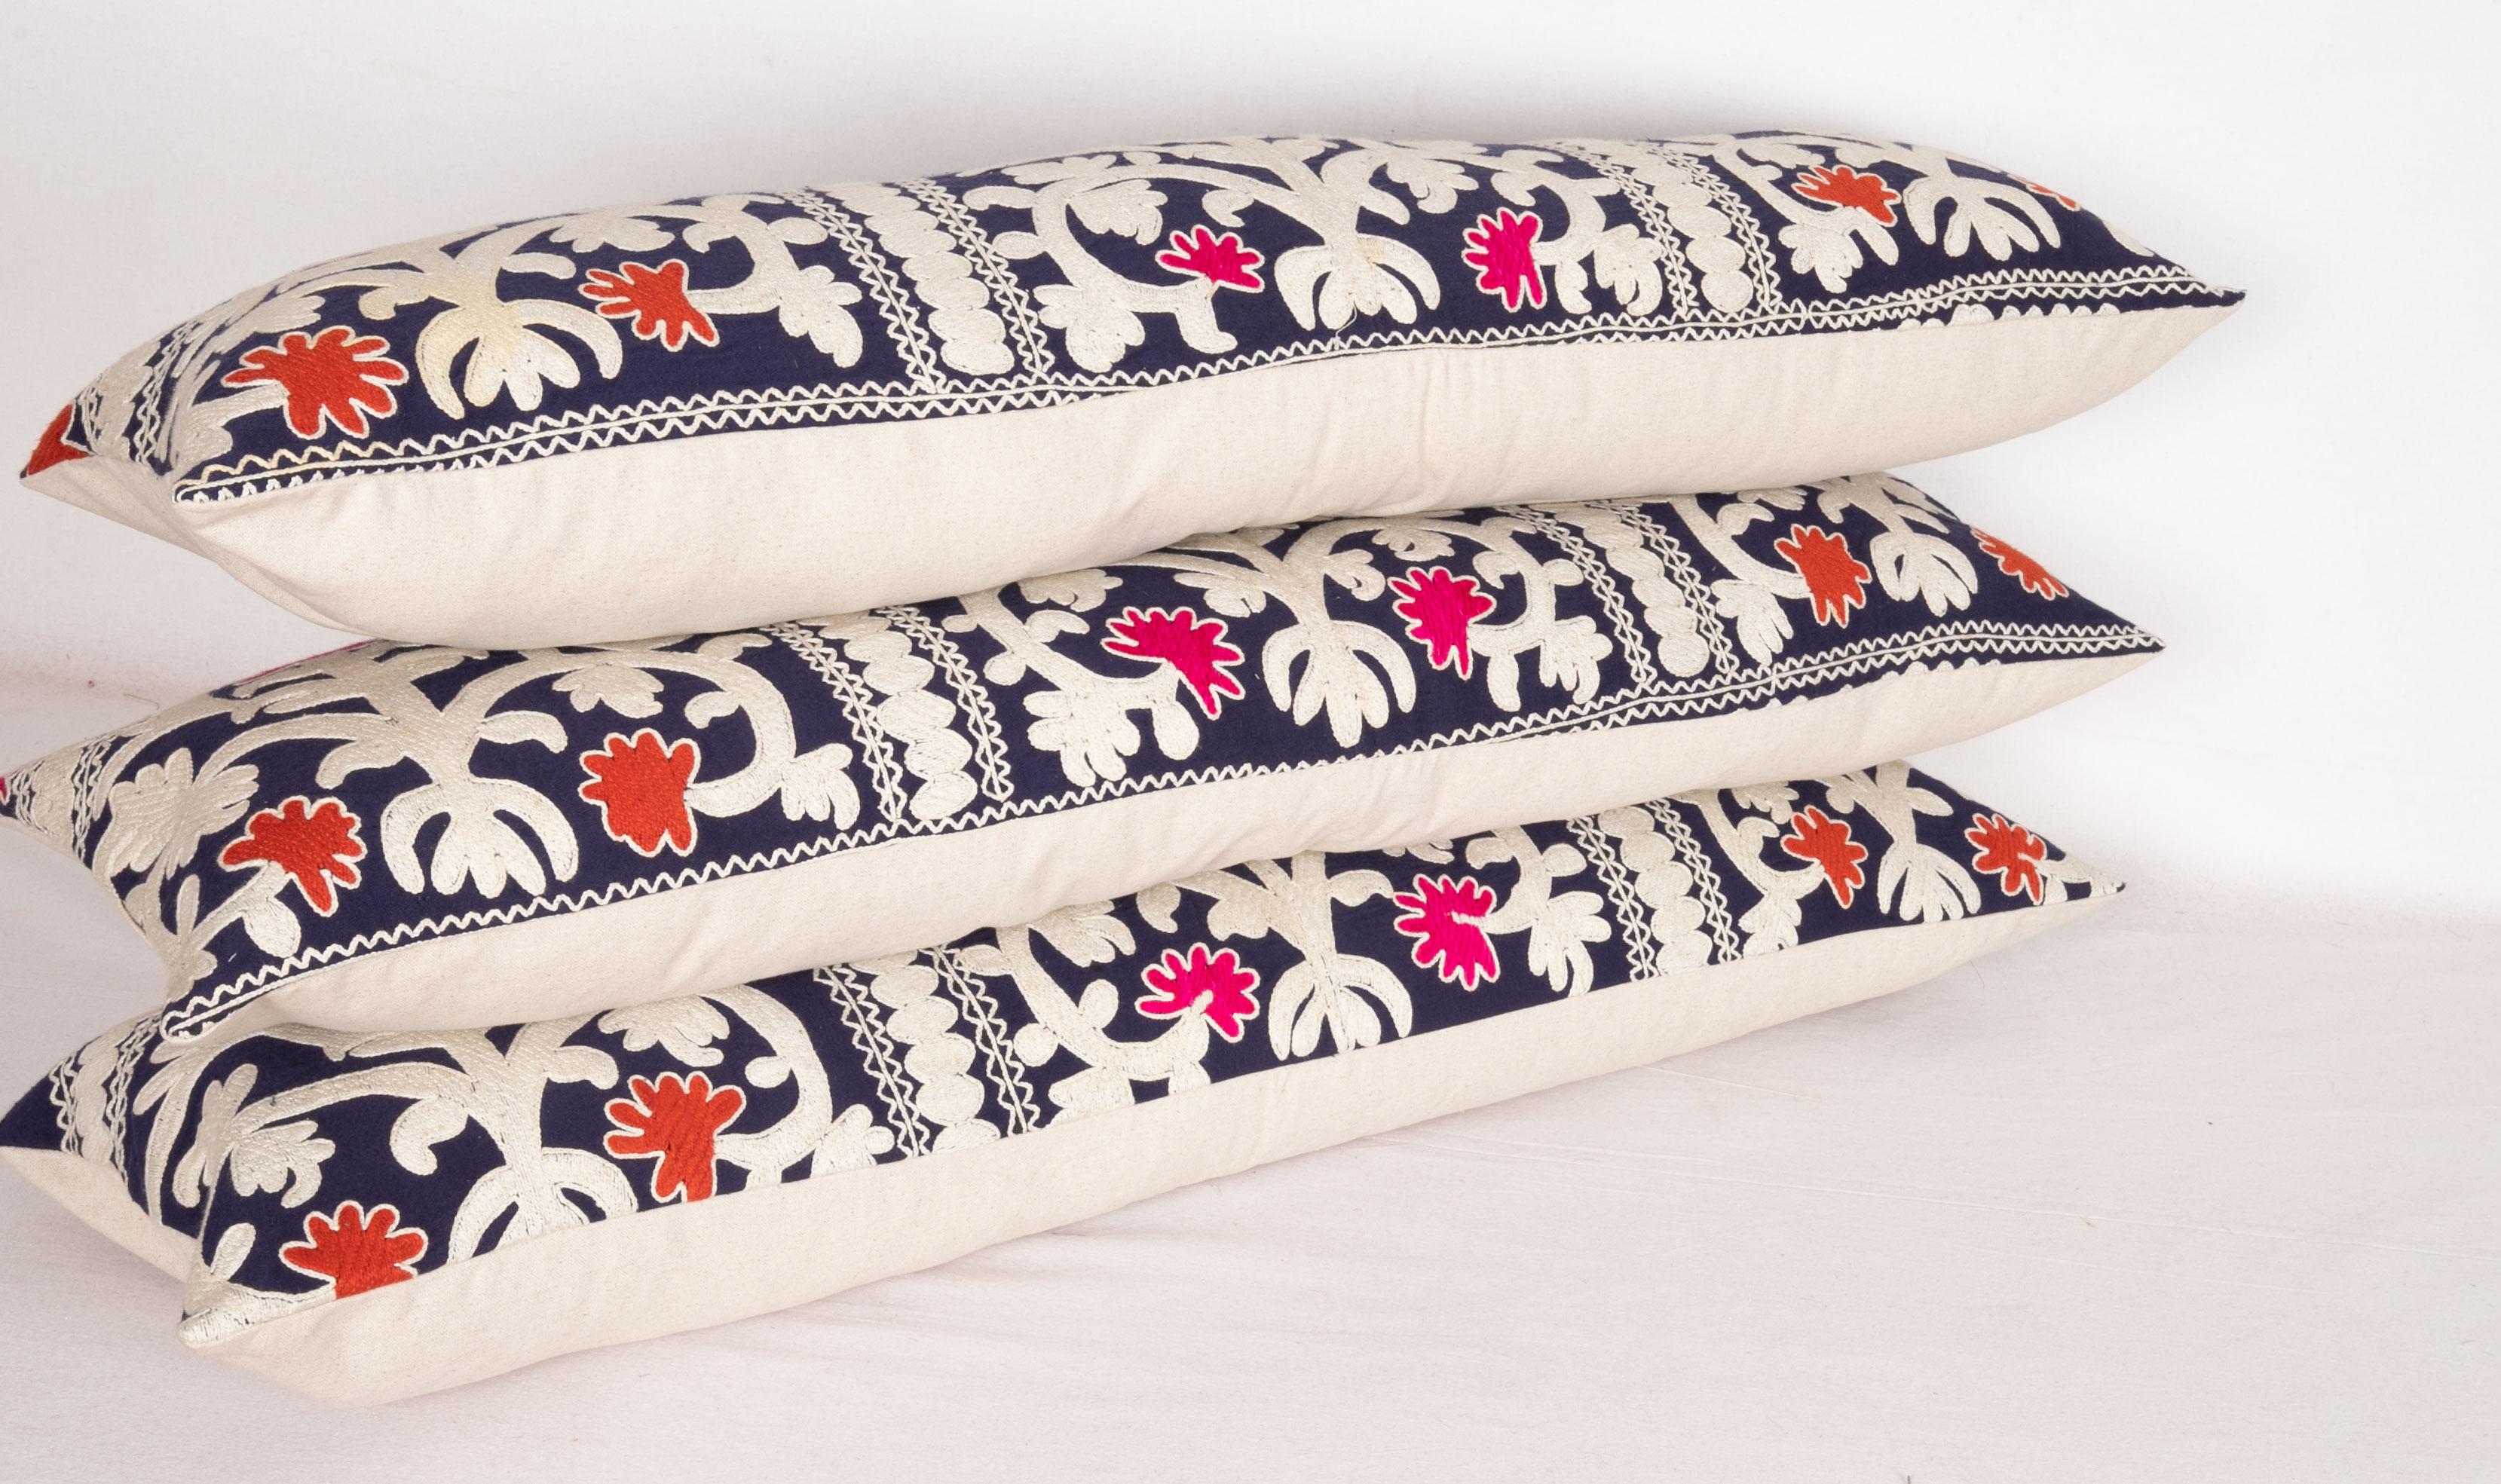 Embroidered Suzani Lumbar Pillow Cases Fashioned from an Uzbek Suzani, 1960s For Sale